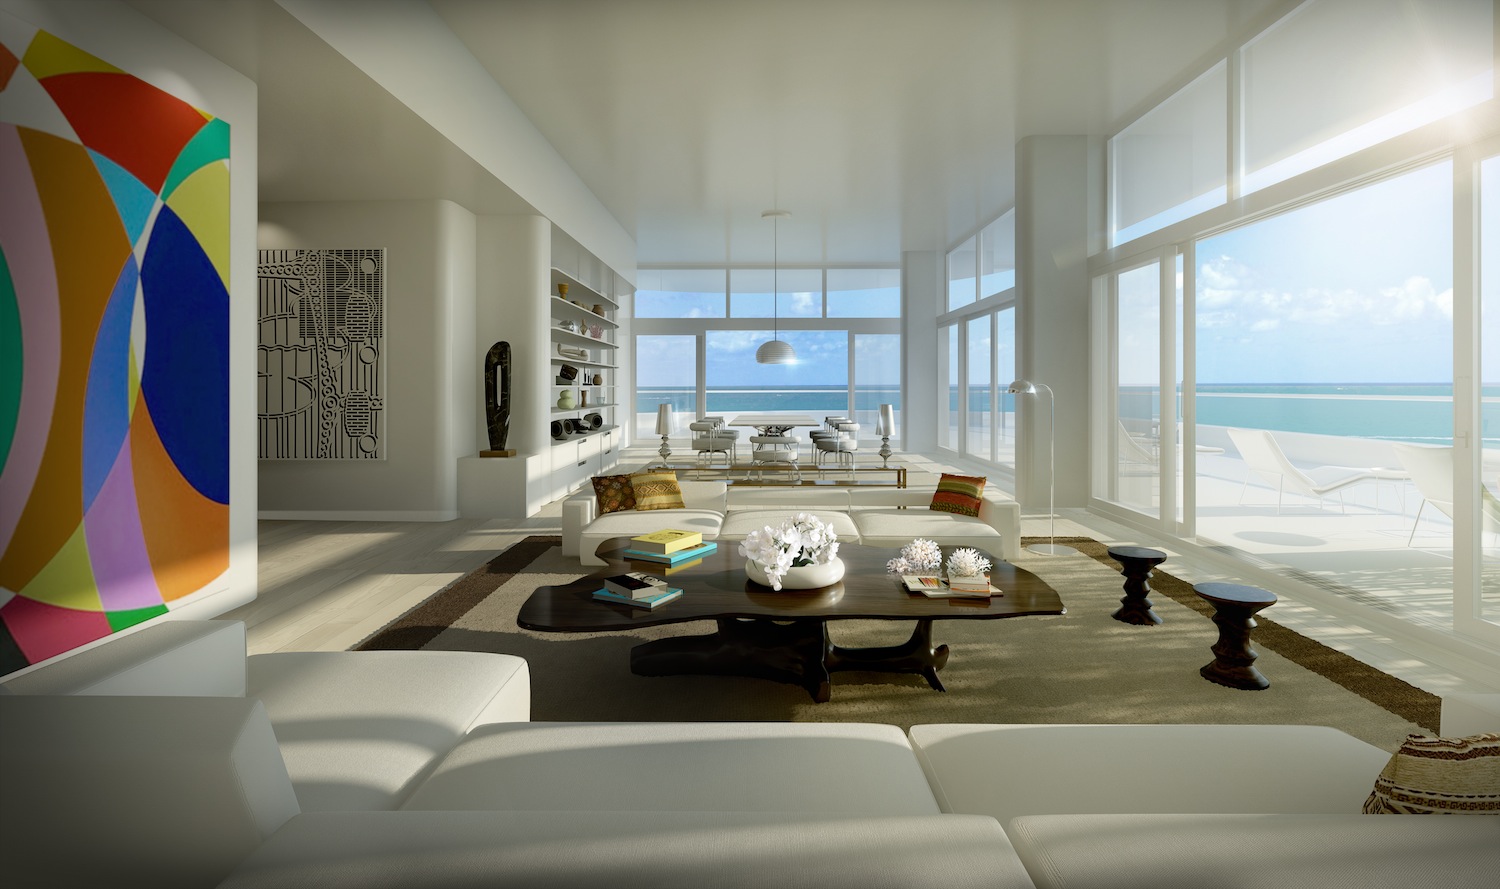 Faena%20House%20-%20Residence%20Interior%20View%20lo%20res.jpeg